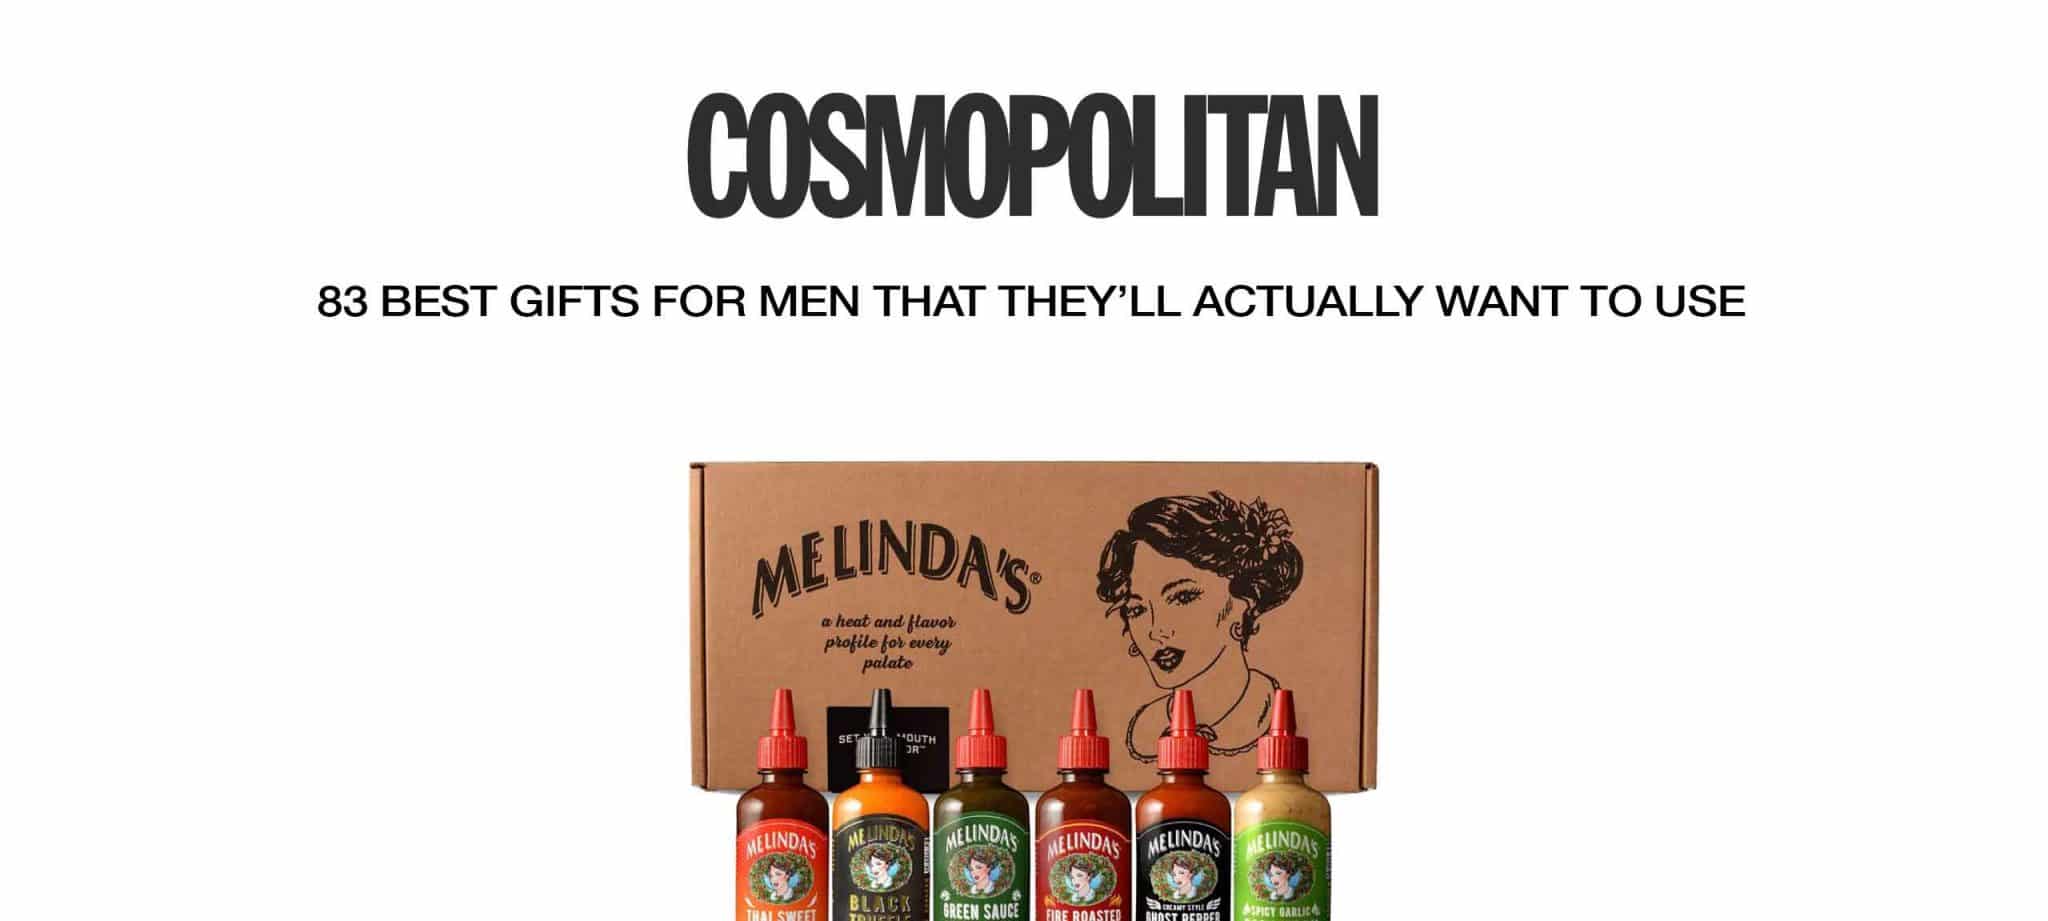 83 Best Gifts for Men That They’ll Actually Want to Use | Says Cosmopolitan